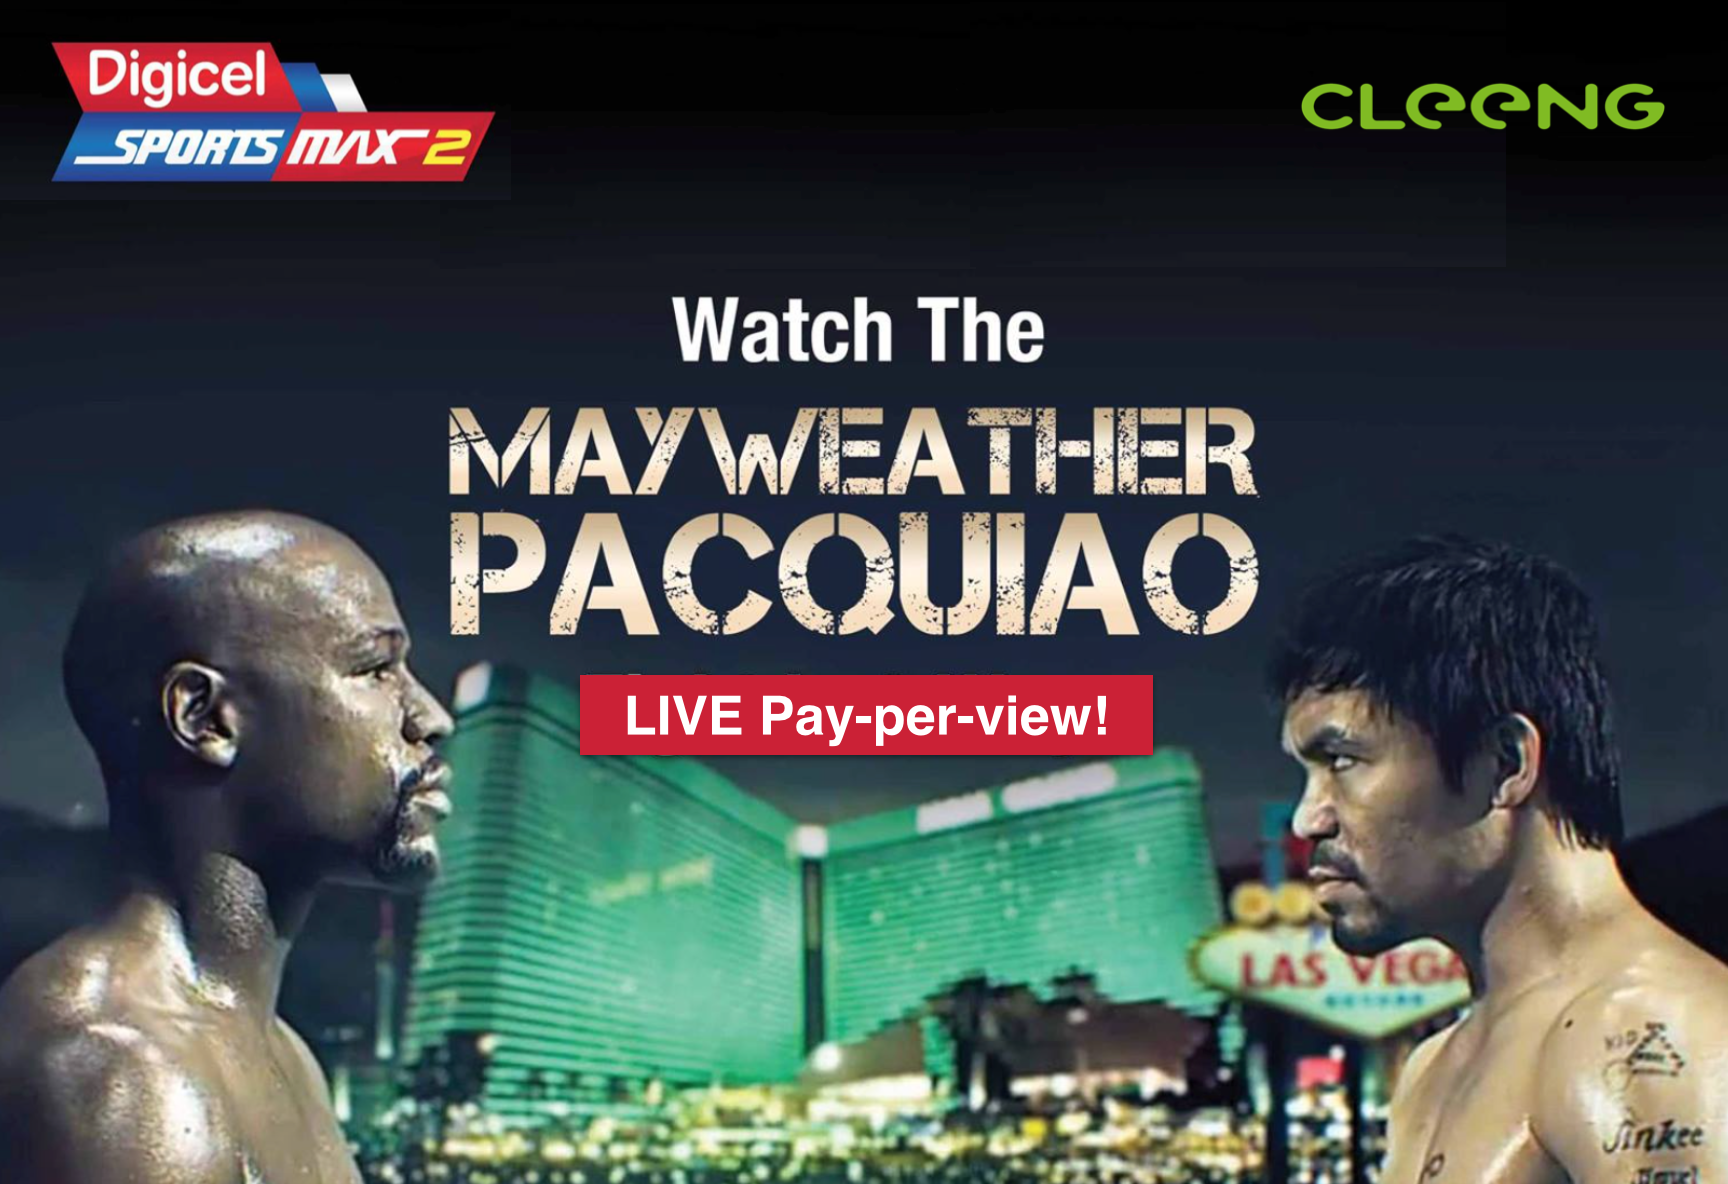 Mayweather Vs Pacquiao As Pay Per View Powered By Cleeng And Sportsmax Tv